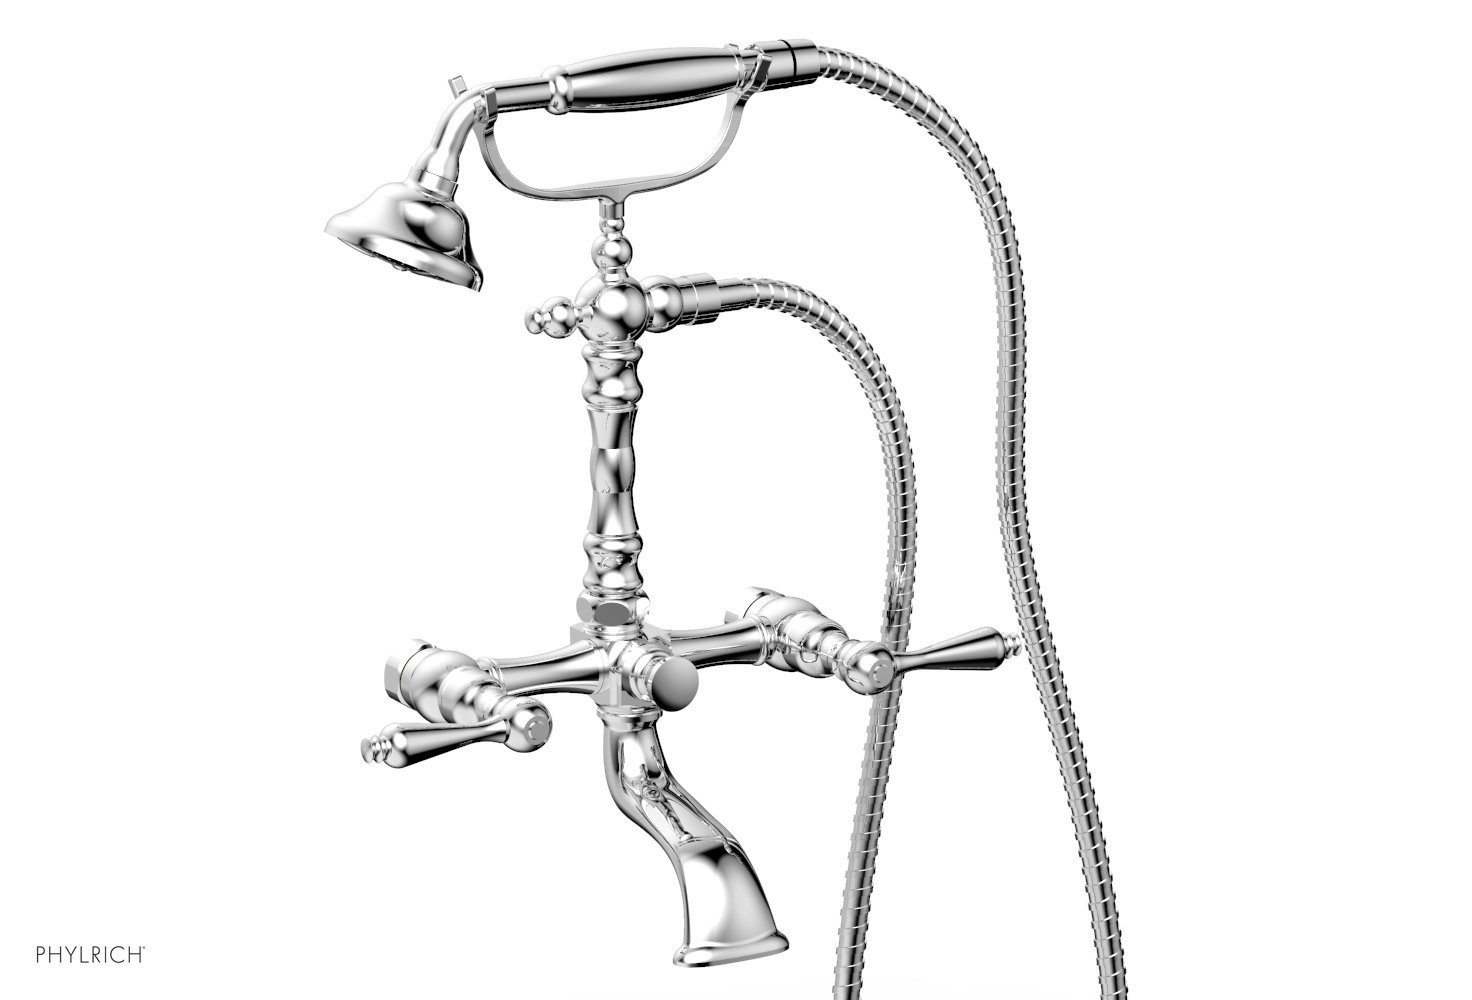 PHYLRICH K2393-17 REVERE & SAVANNAH TWO HOLES WALL MOUNT EXPOSED TUB FILLER WITH HAND SHOWER AND LEVER HANDLE